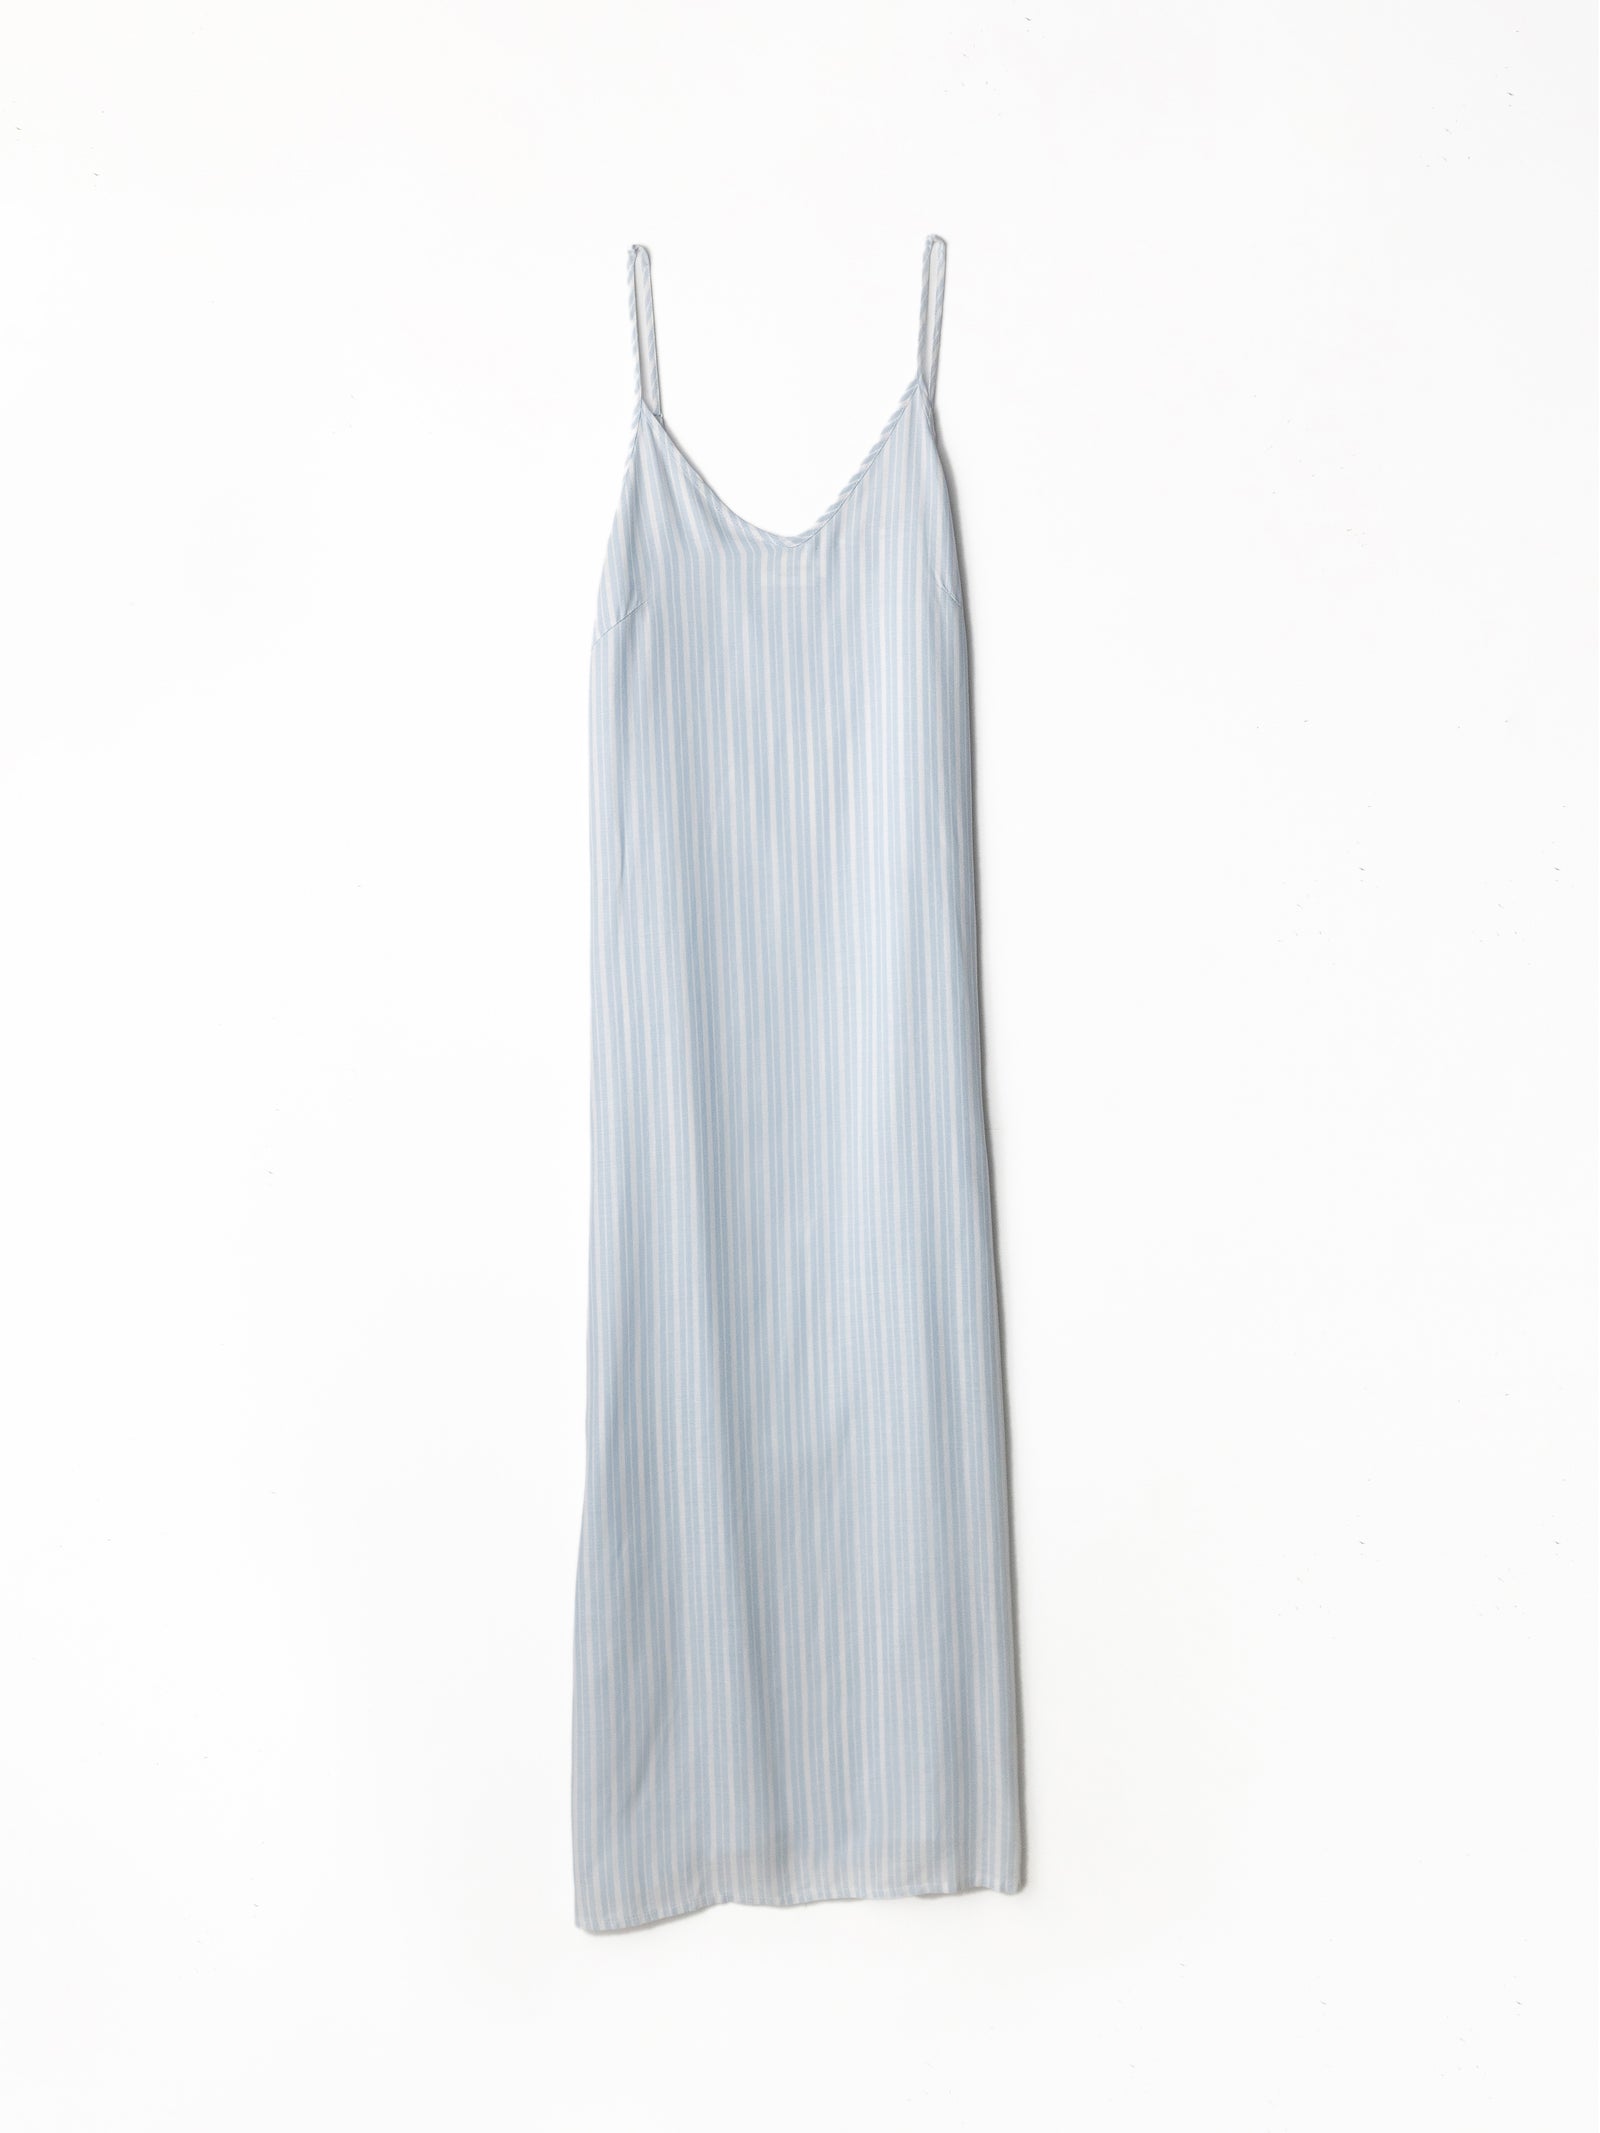 Spring Blue Stripe nightgown in front of white background 